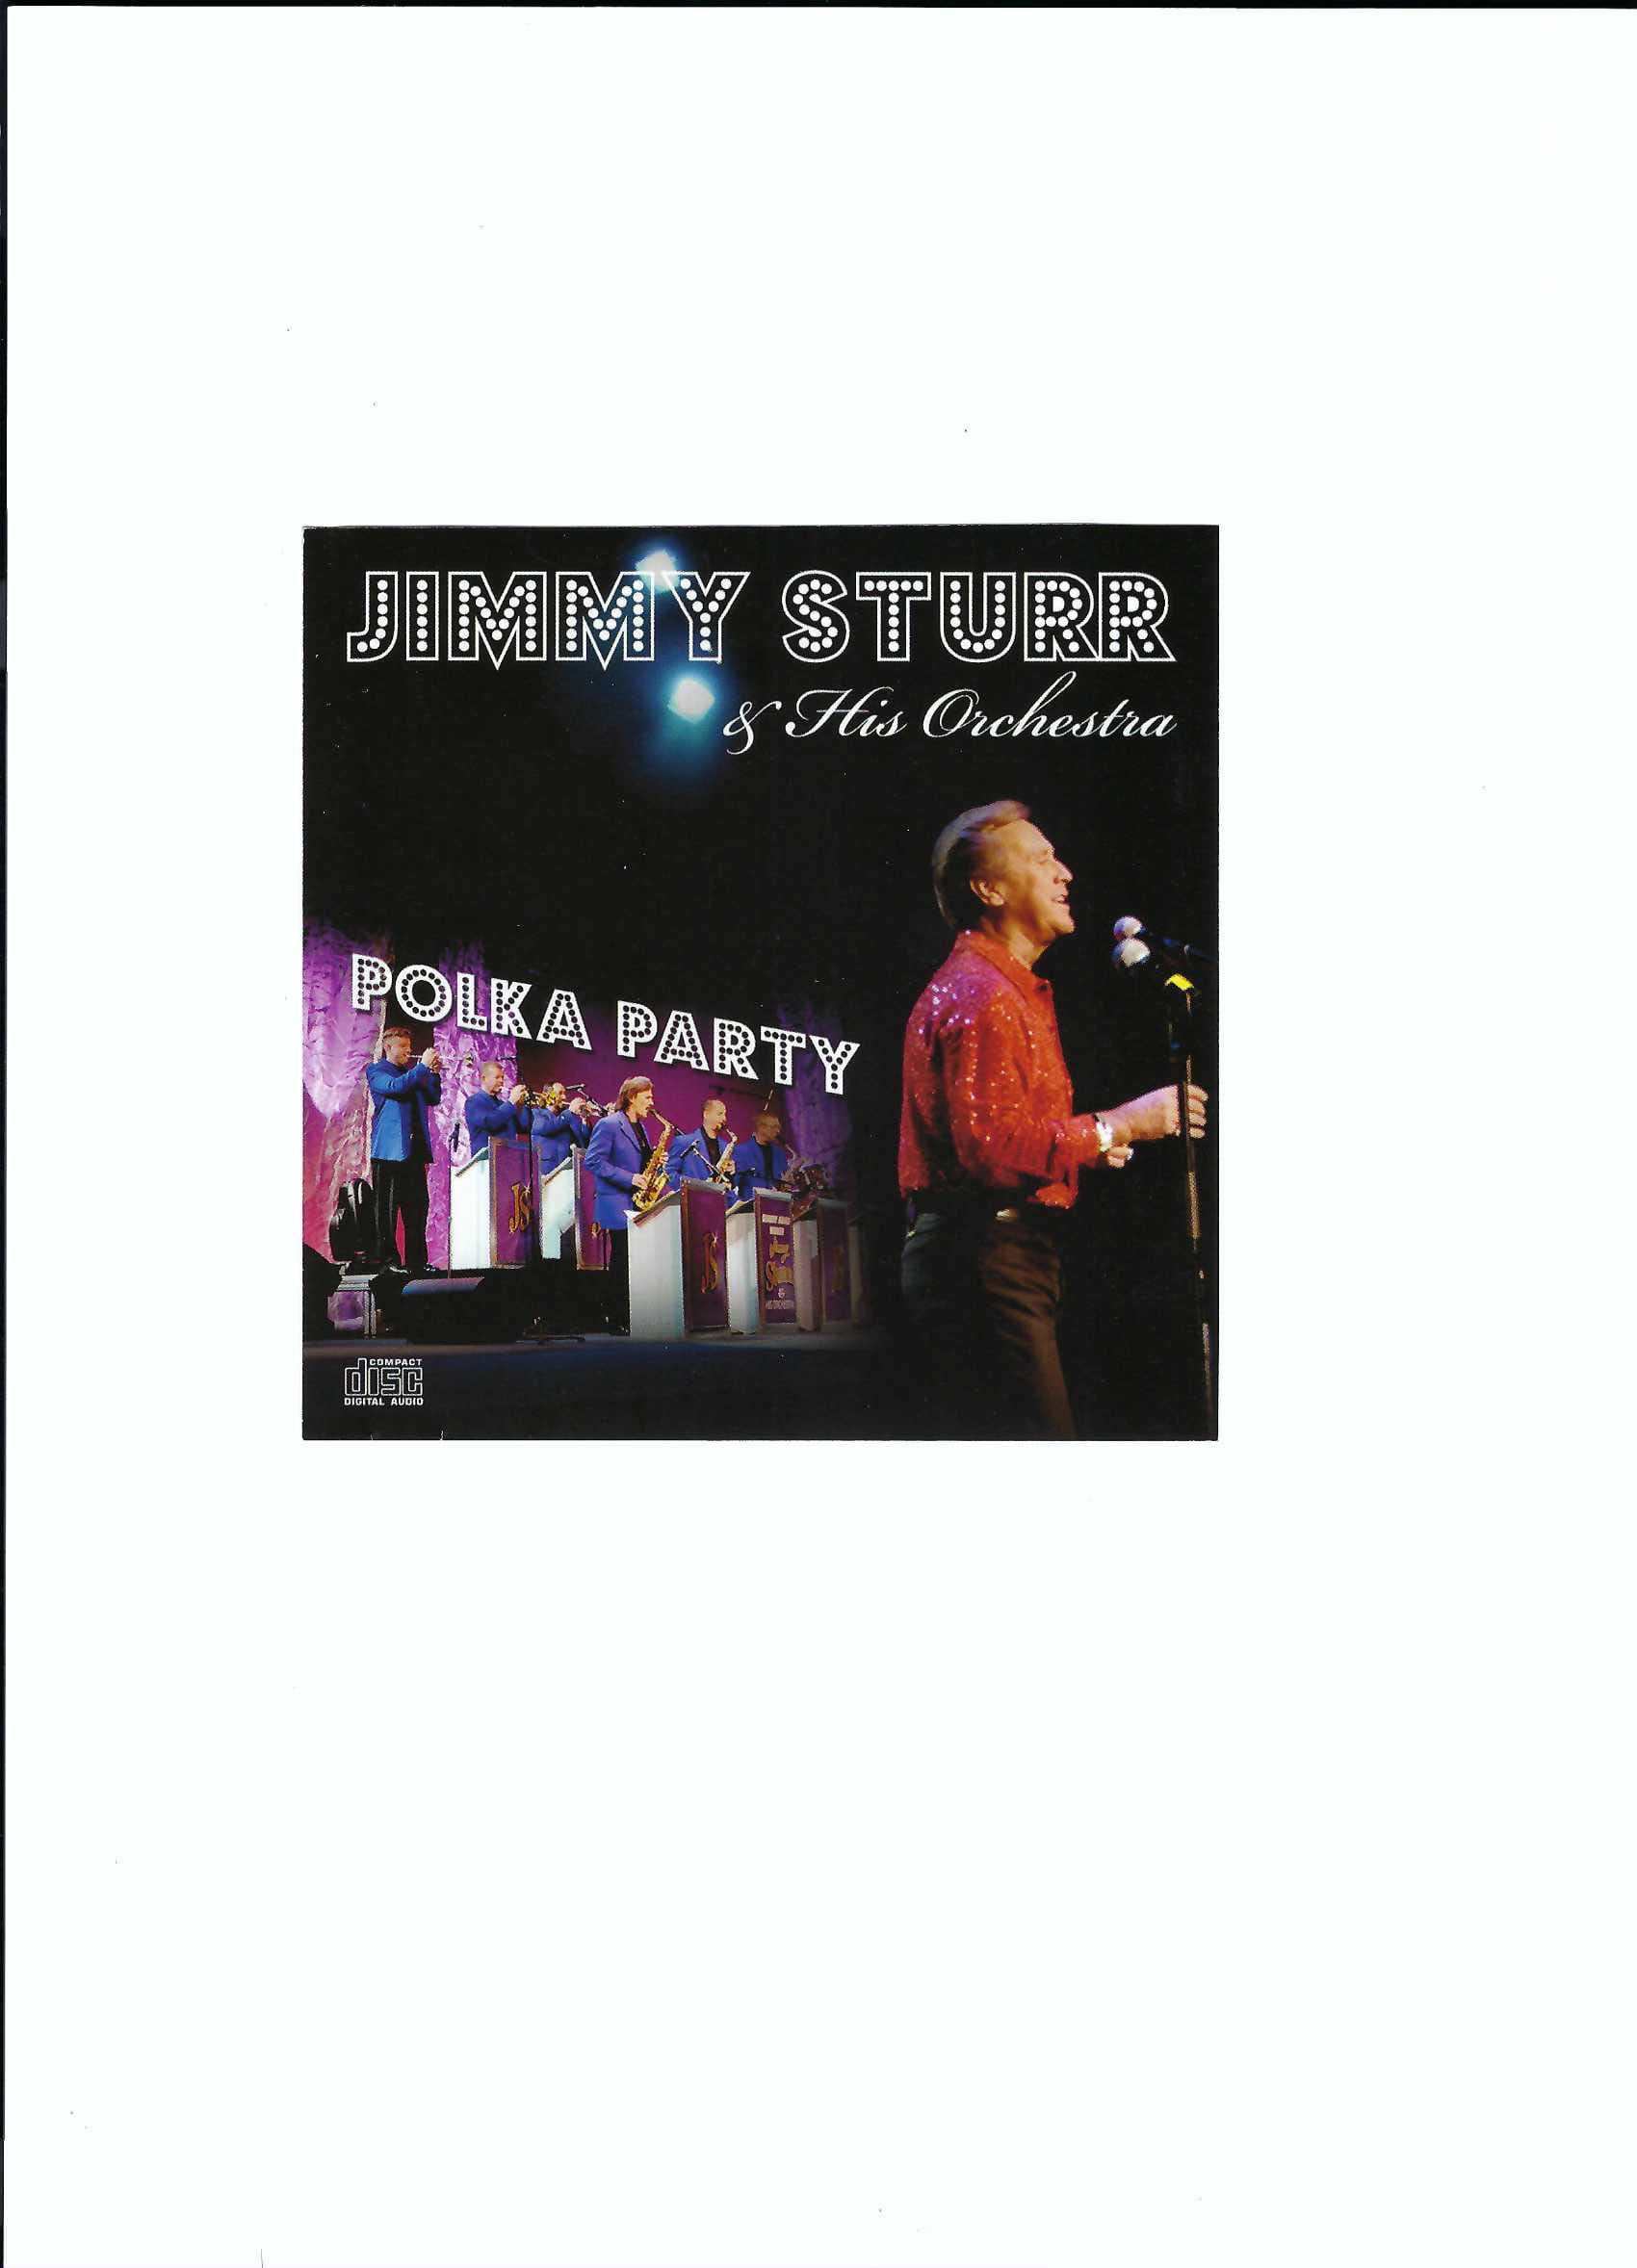 Polka Party CD Package by Jimmy Sturr and His Orchesturr!